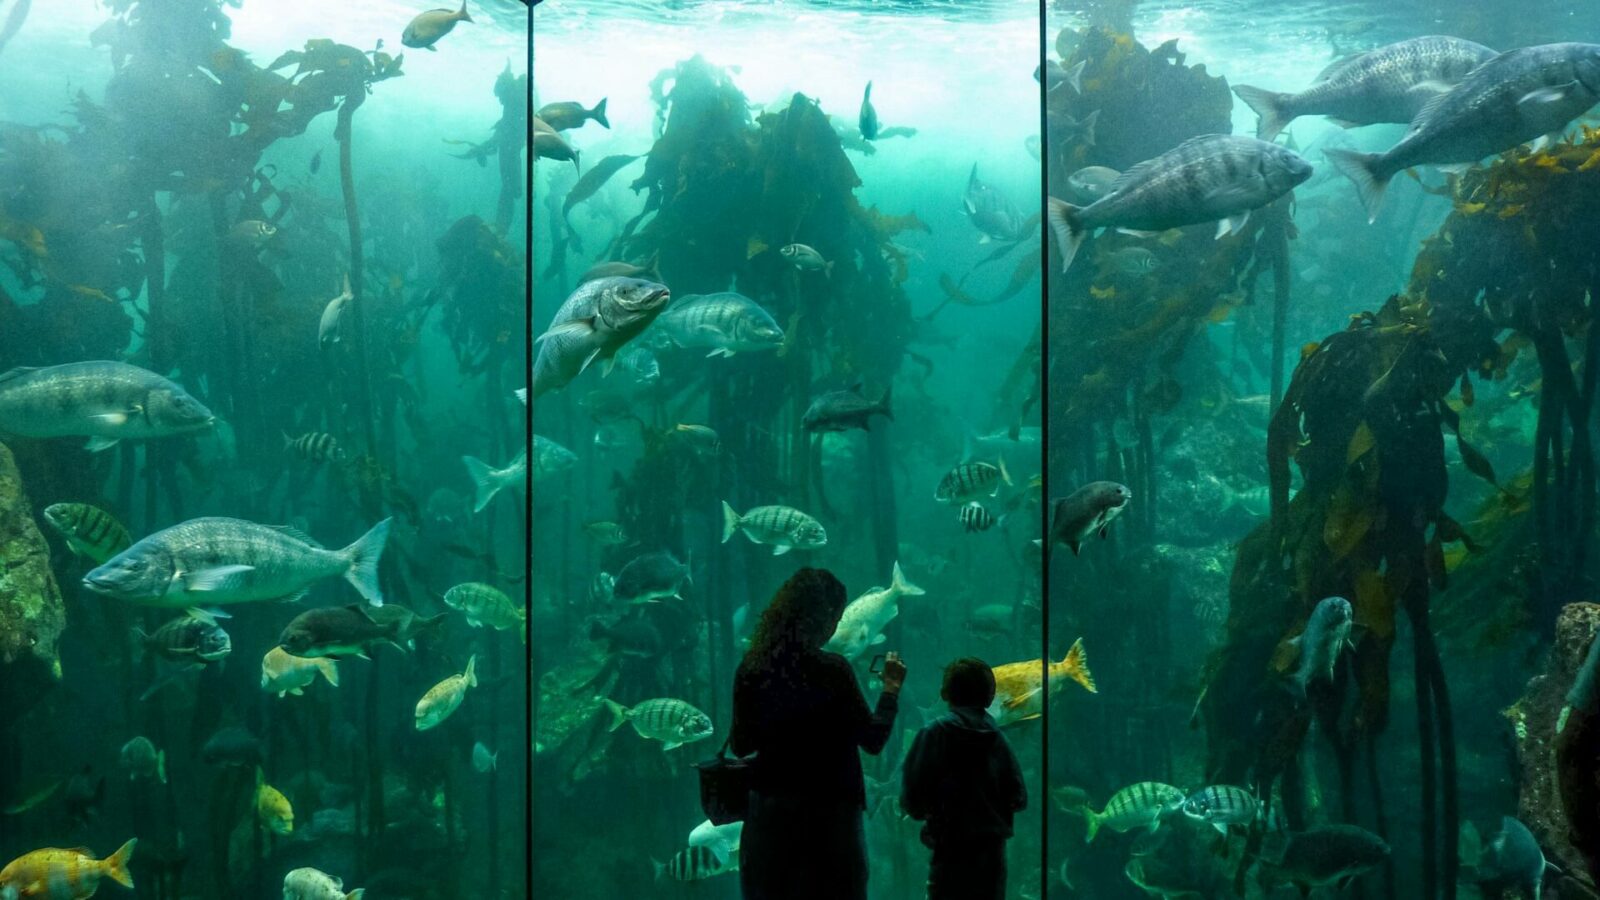 The Two Oceans Aquarium - one of the things to do in Cape Town with kids.